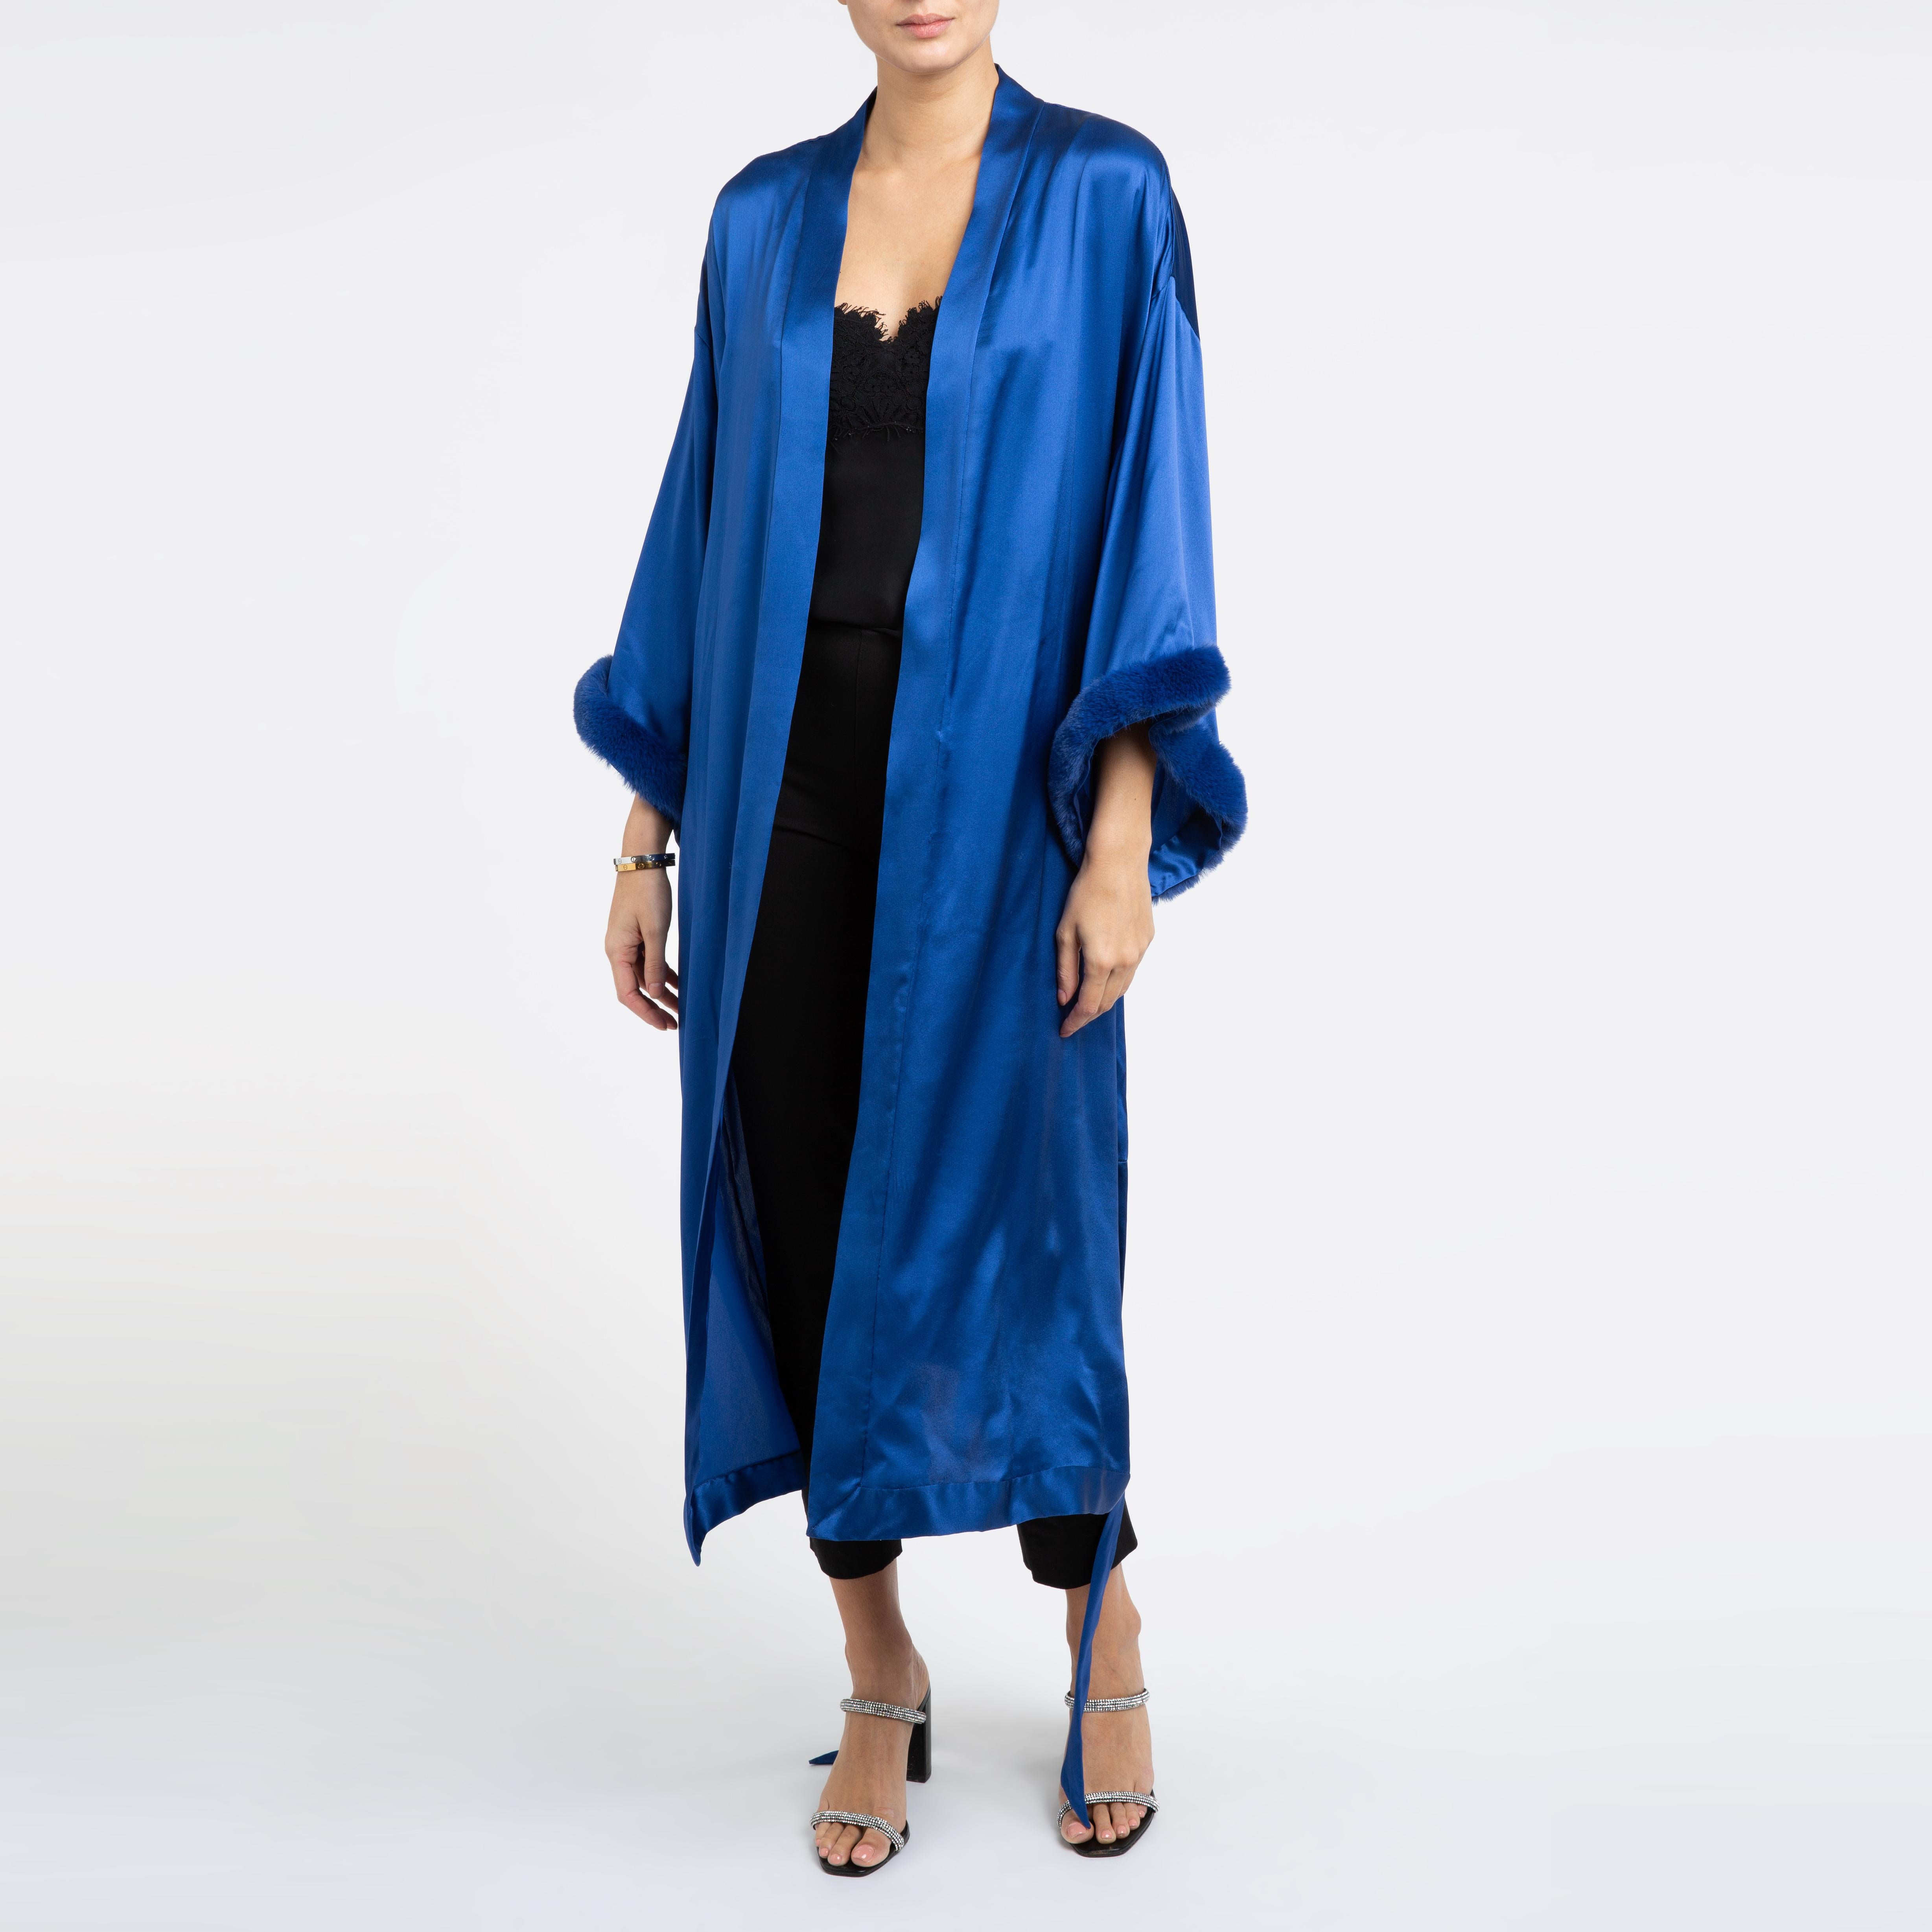 Verheyen London Blue Kimono in Italian Silk Satin with Faux Fur - One Size 

The Verheyen London Kimono is the perfect dress for evening wear or coat dress to wear with a pair of jeans and heels in the evening.  
Handmade in London, made with 100%